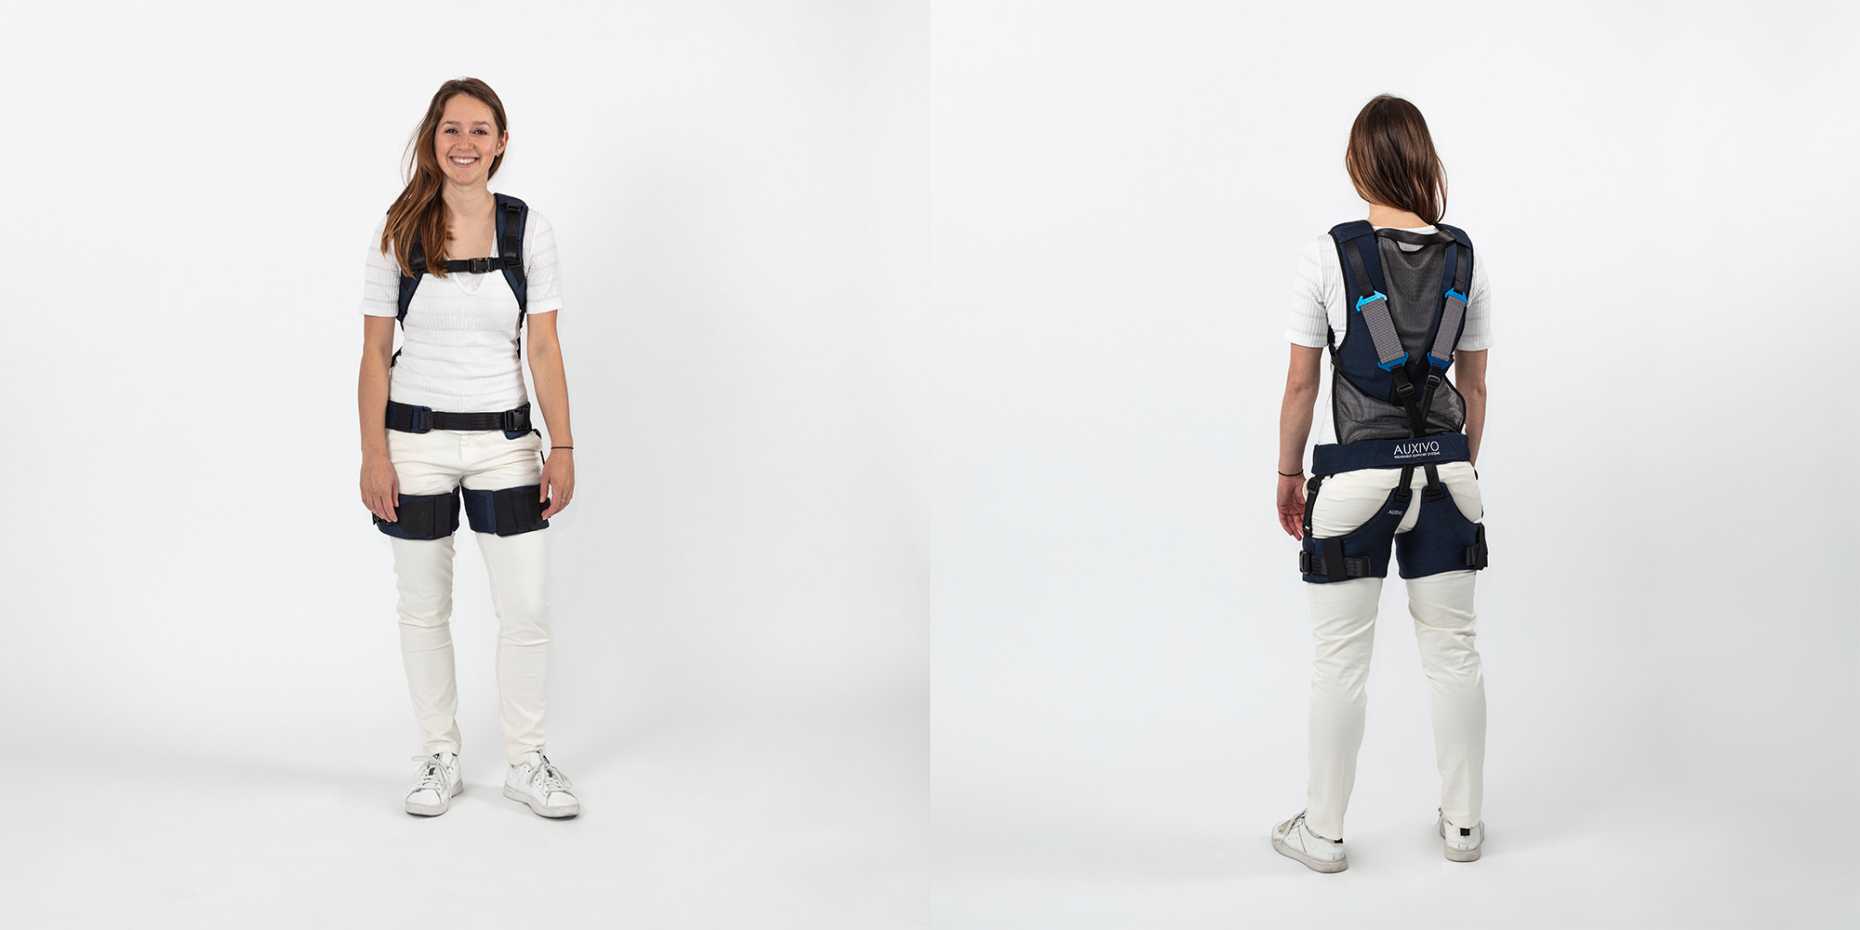 Woman wearing exoskelett - view from front and back